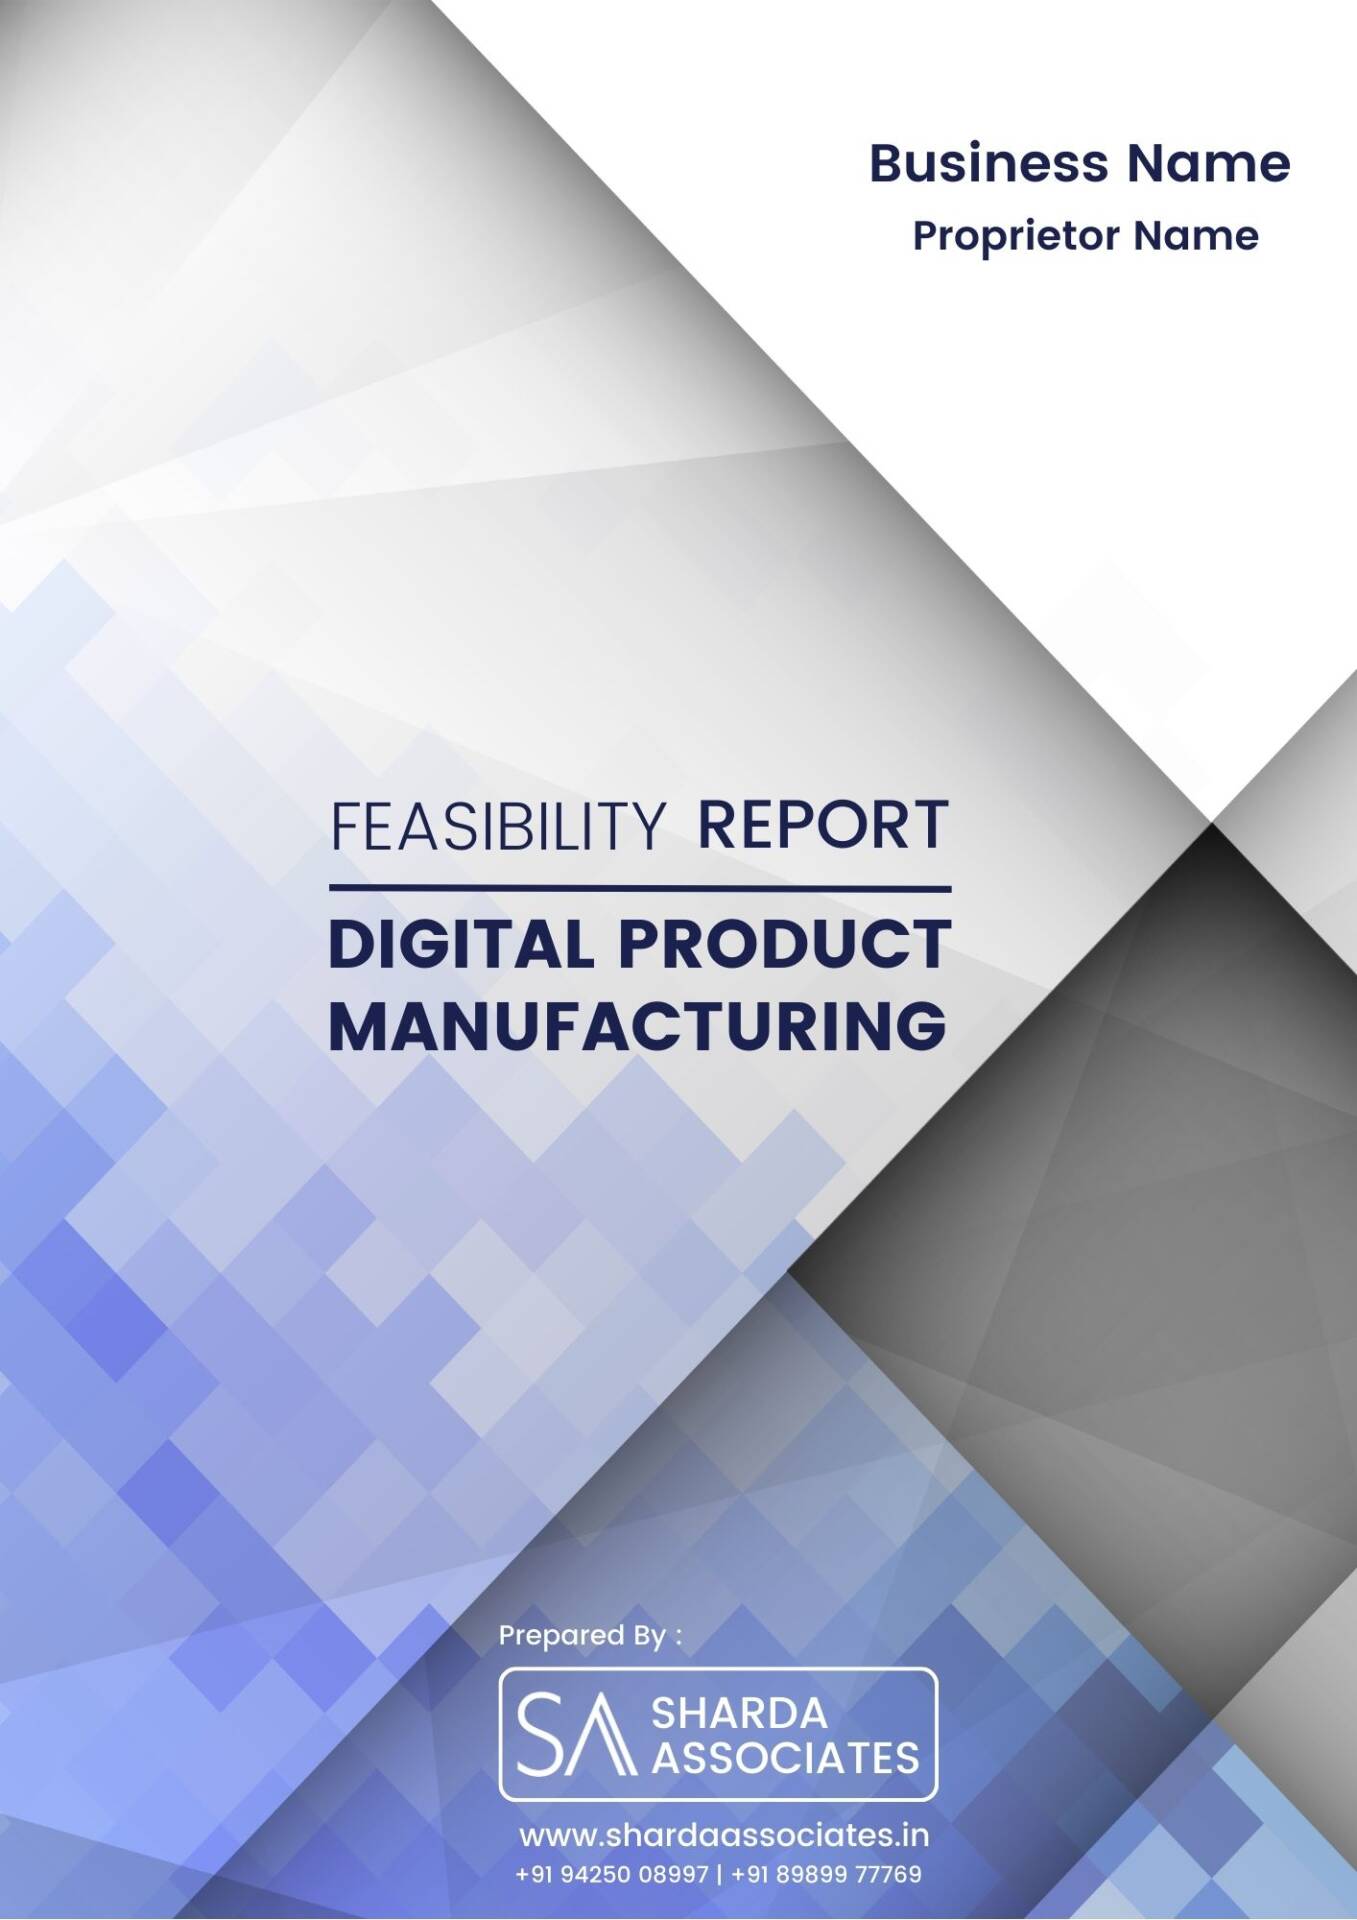 Digital Product Manufacturing